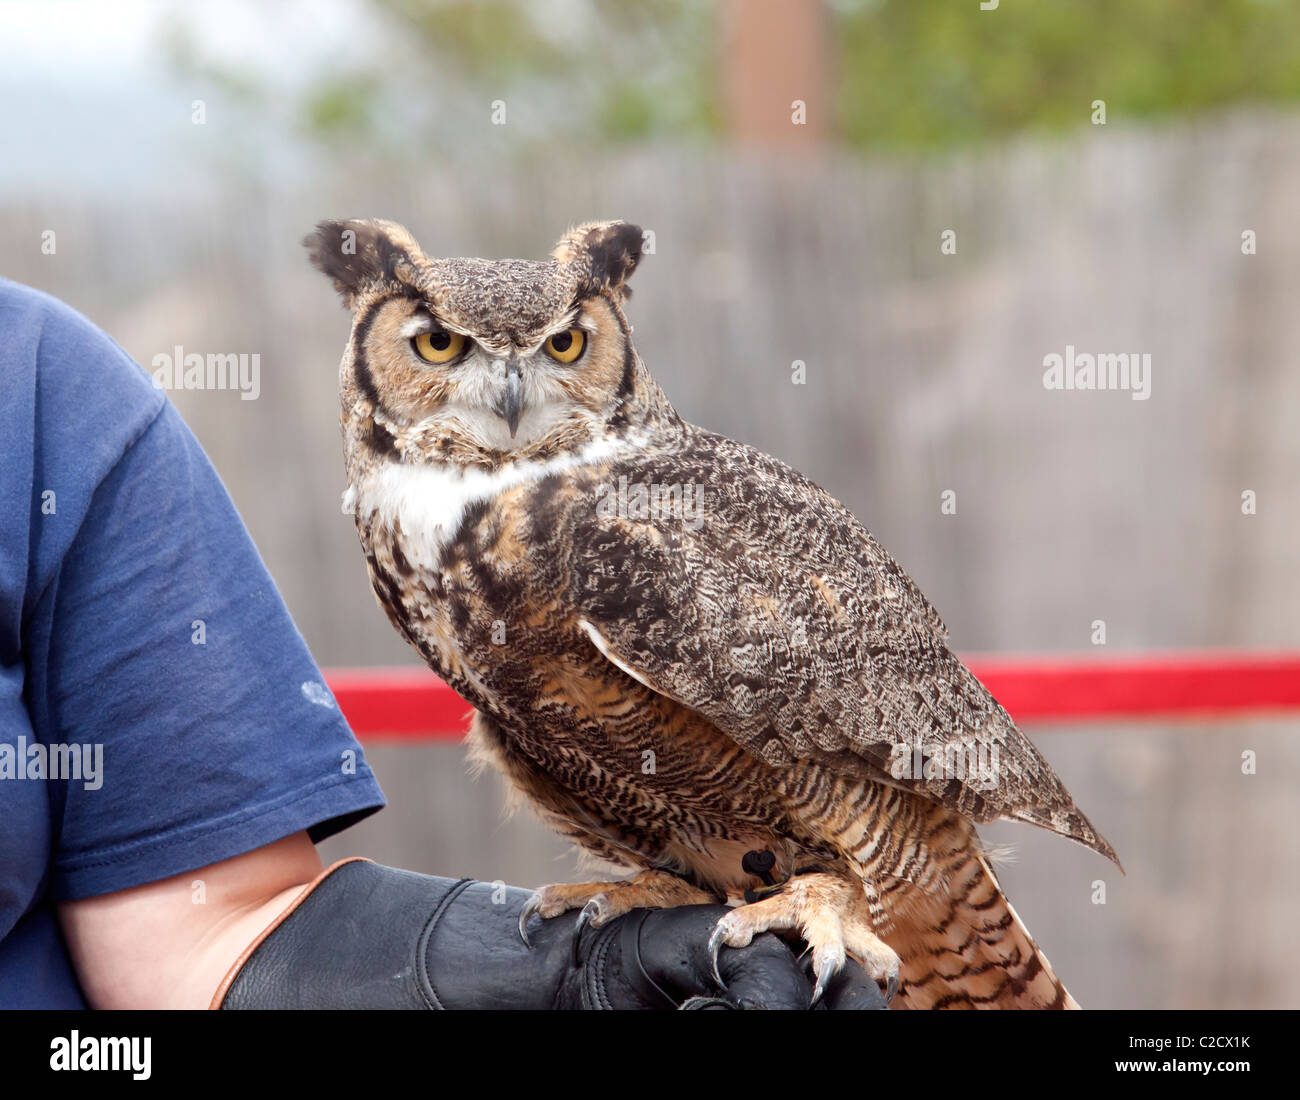 Great Horned Owl (Bubo virginianu) perched on trainers arm Stock Photo